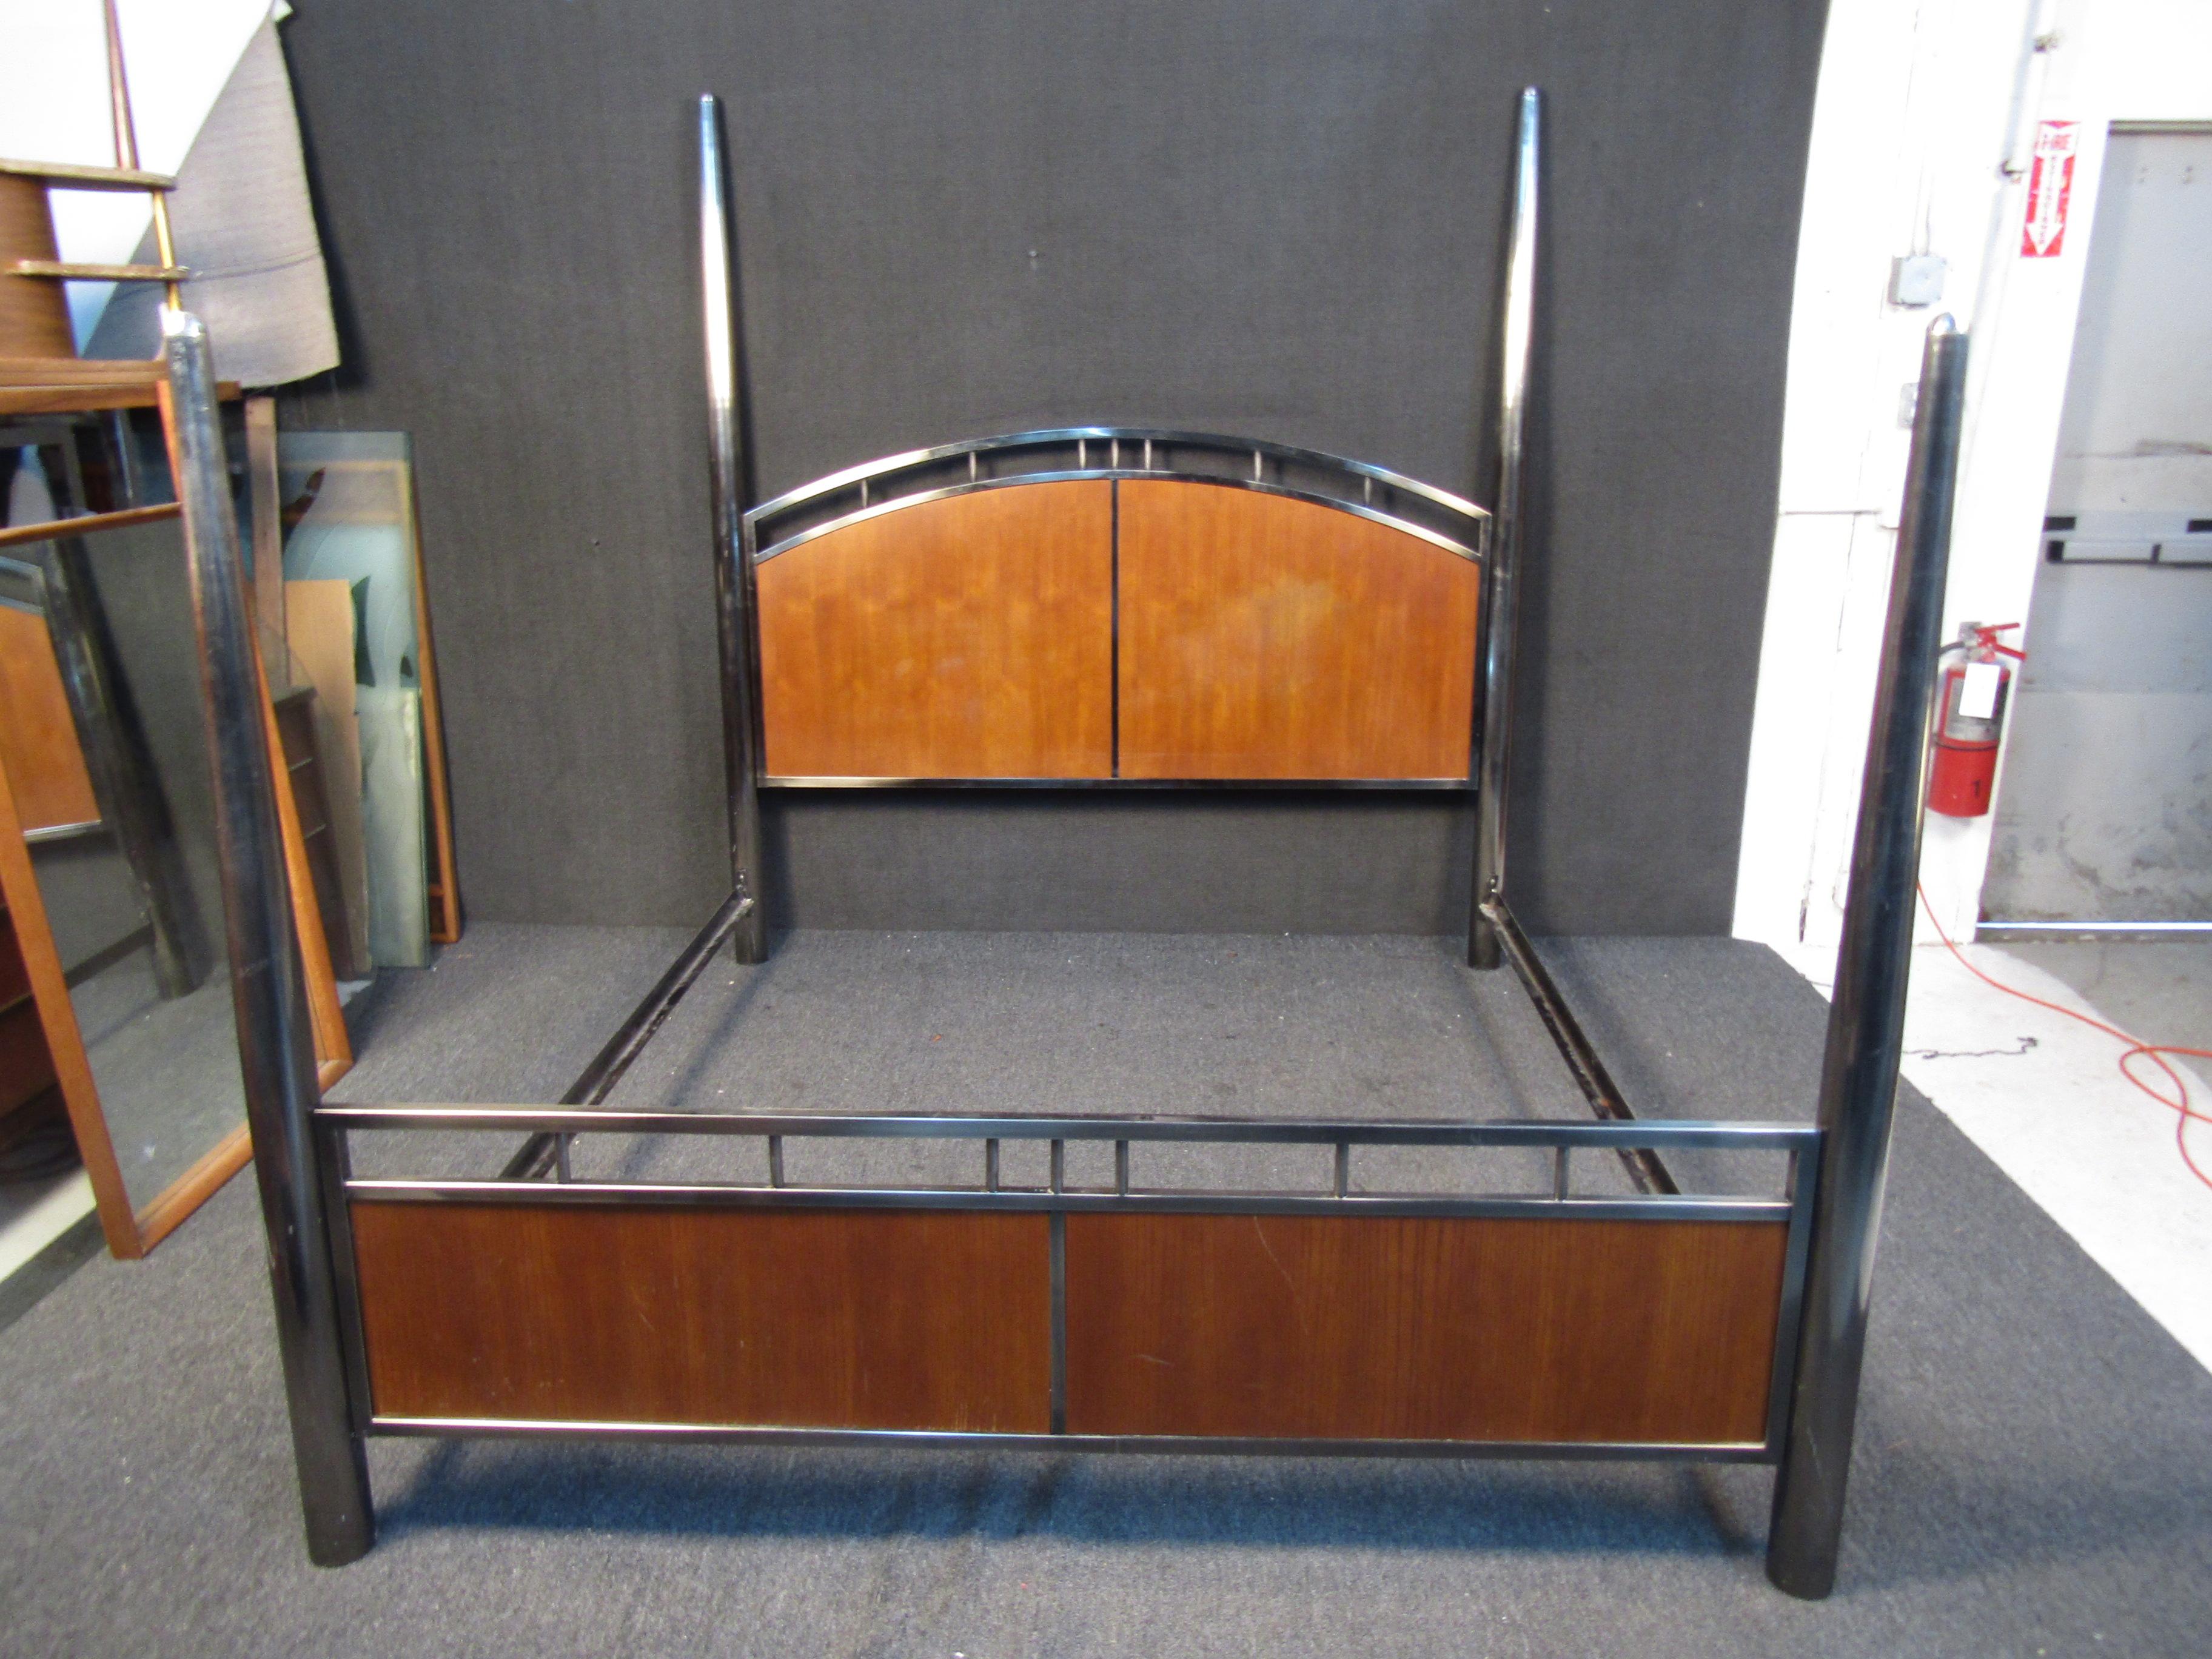 This impressive bed frame set by Mastercraft features tall bedposts and contrasting materials for a unique Mid-Century Modern look. Please confirm item location with seller (NY/NJ).